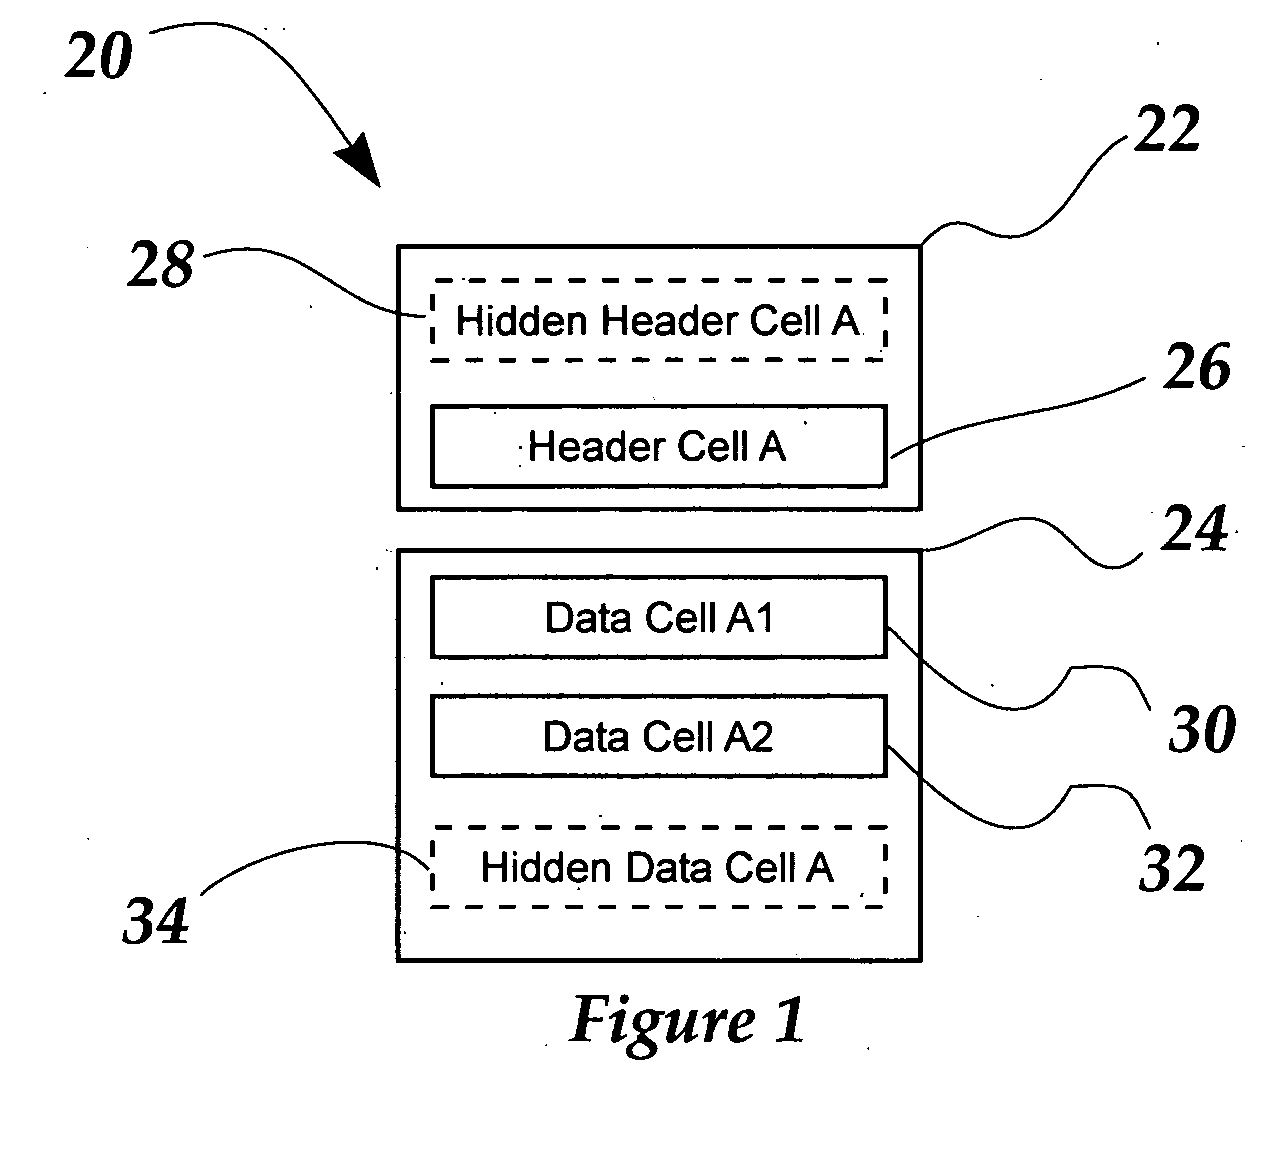 Method of displaying data in a table